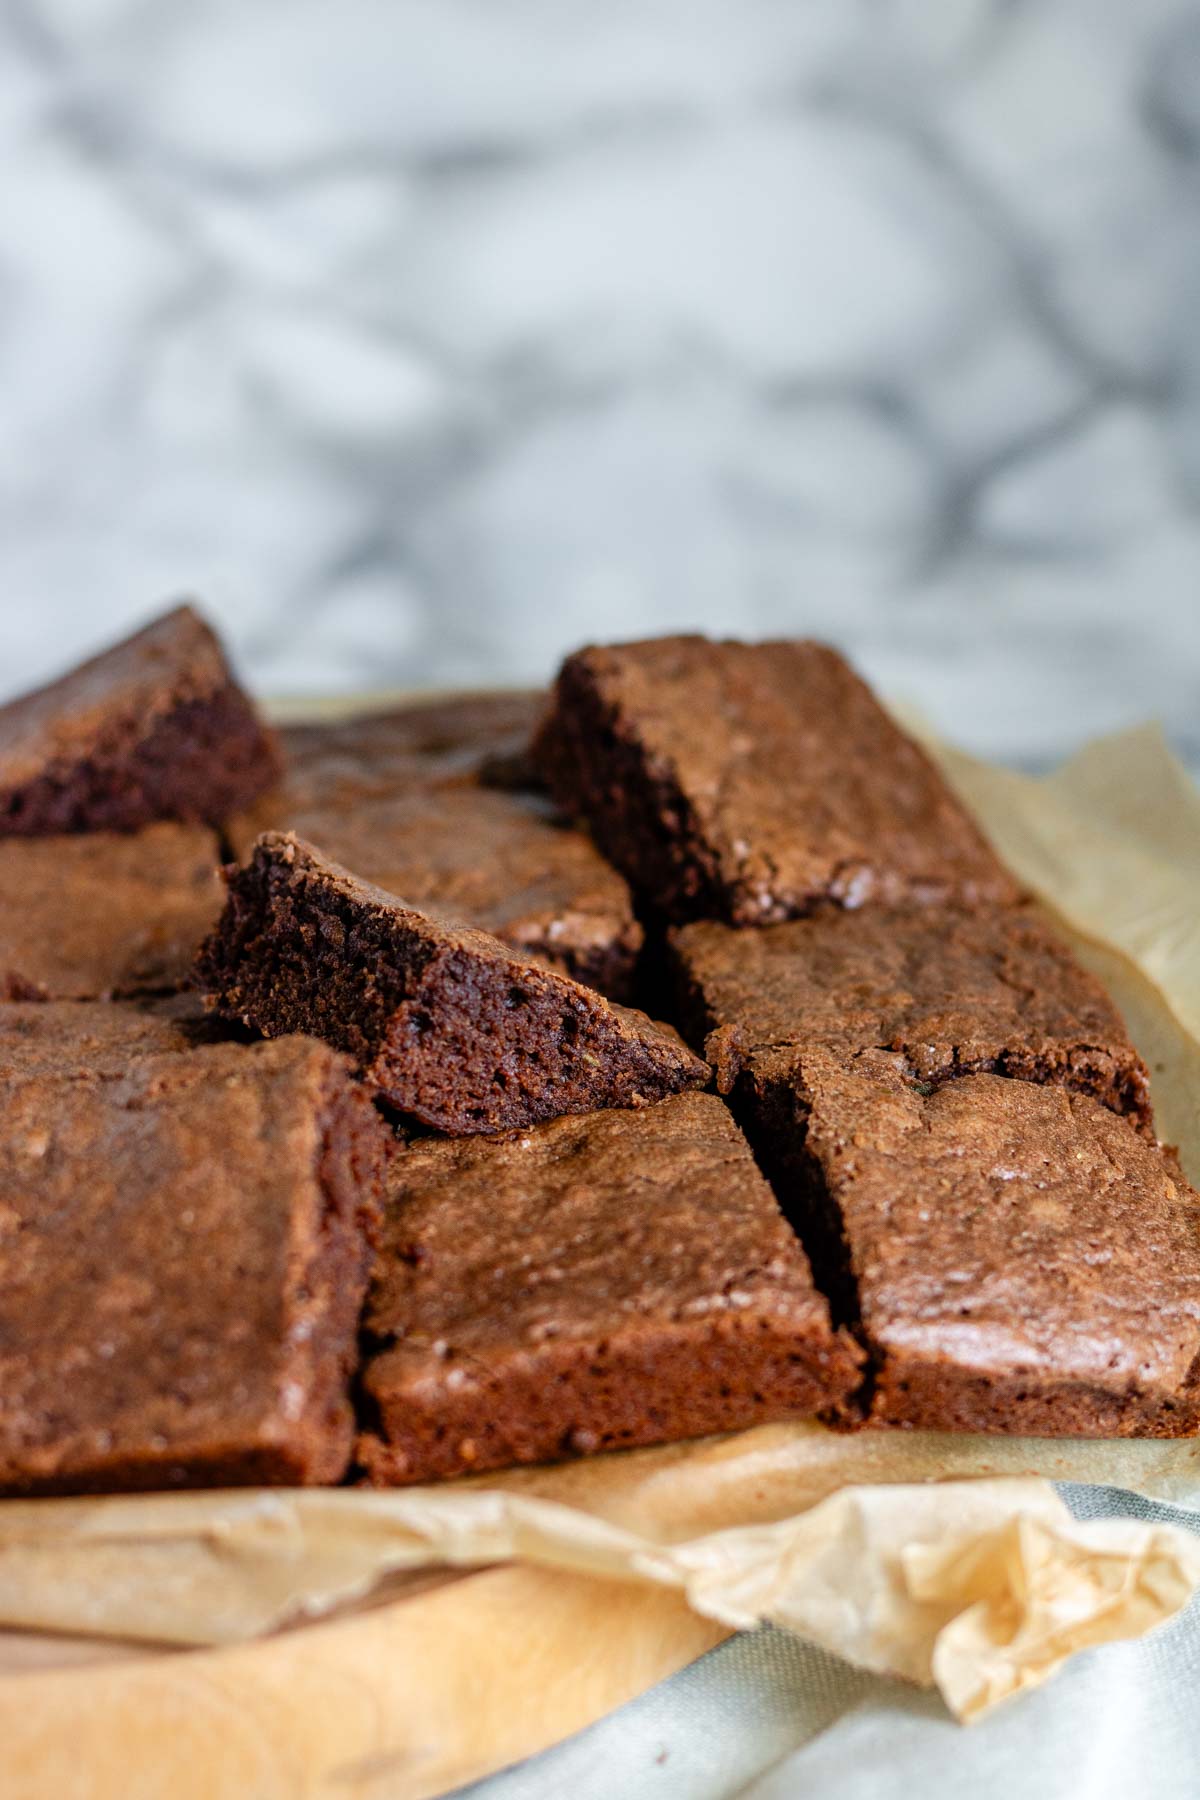 Brownies sit on parchment paper, cut into 16 squares.